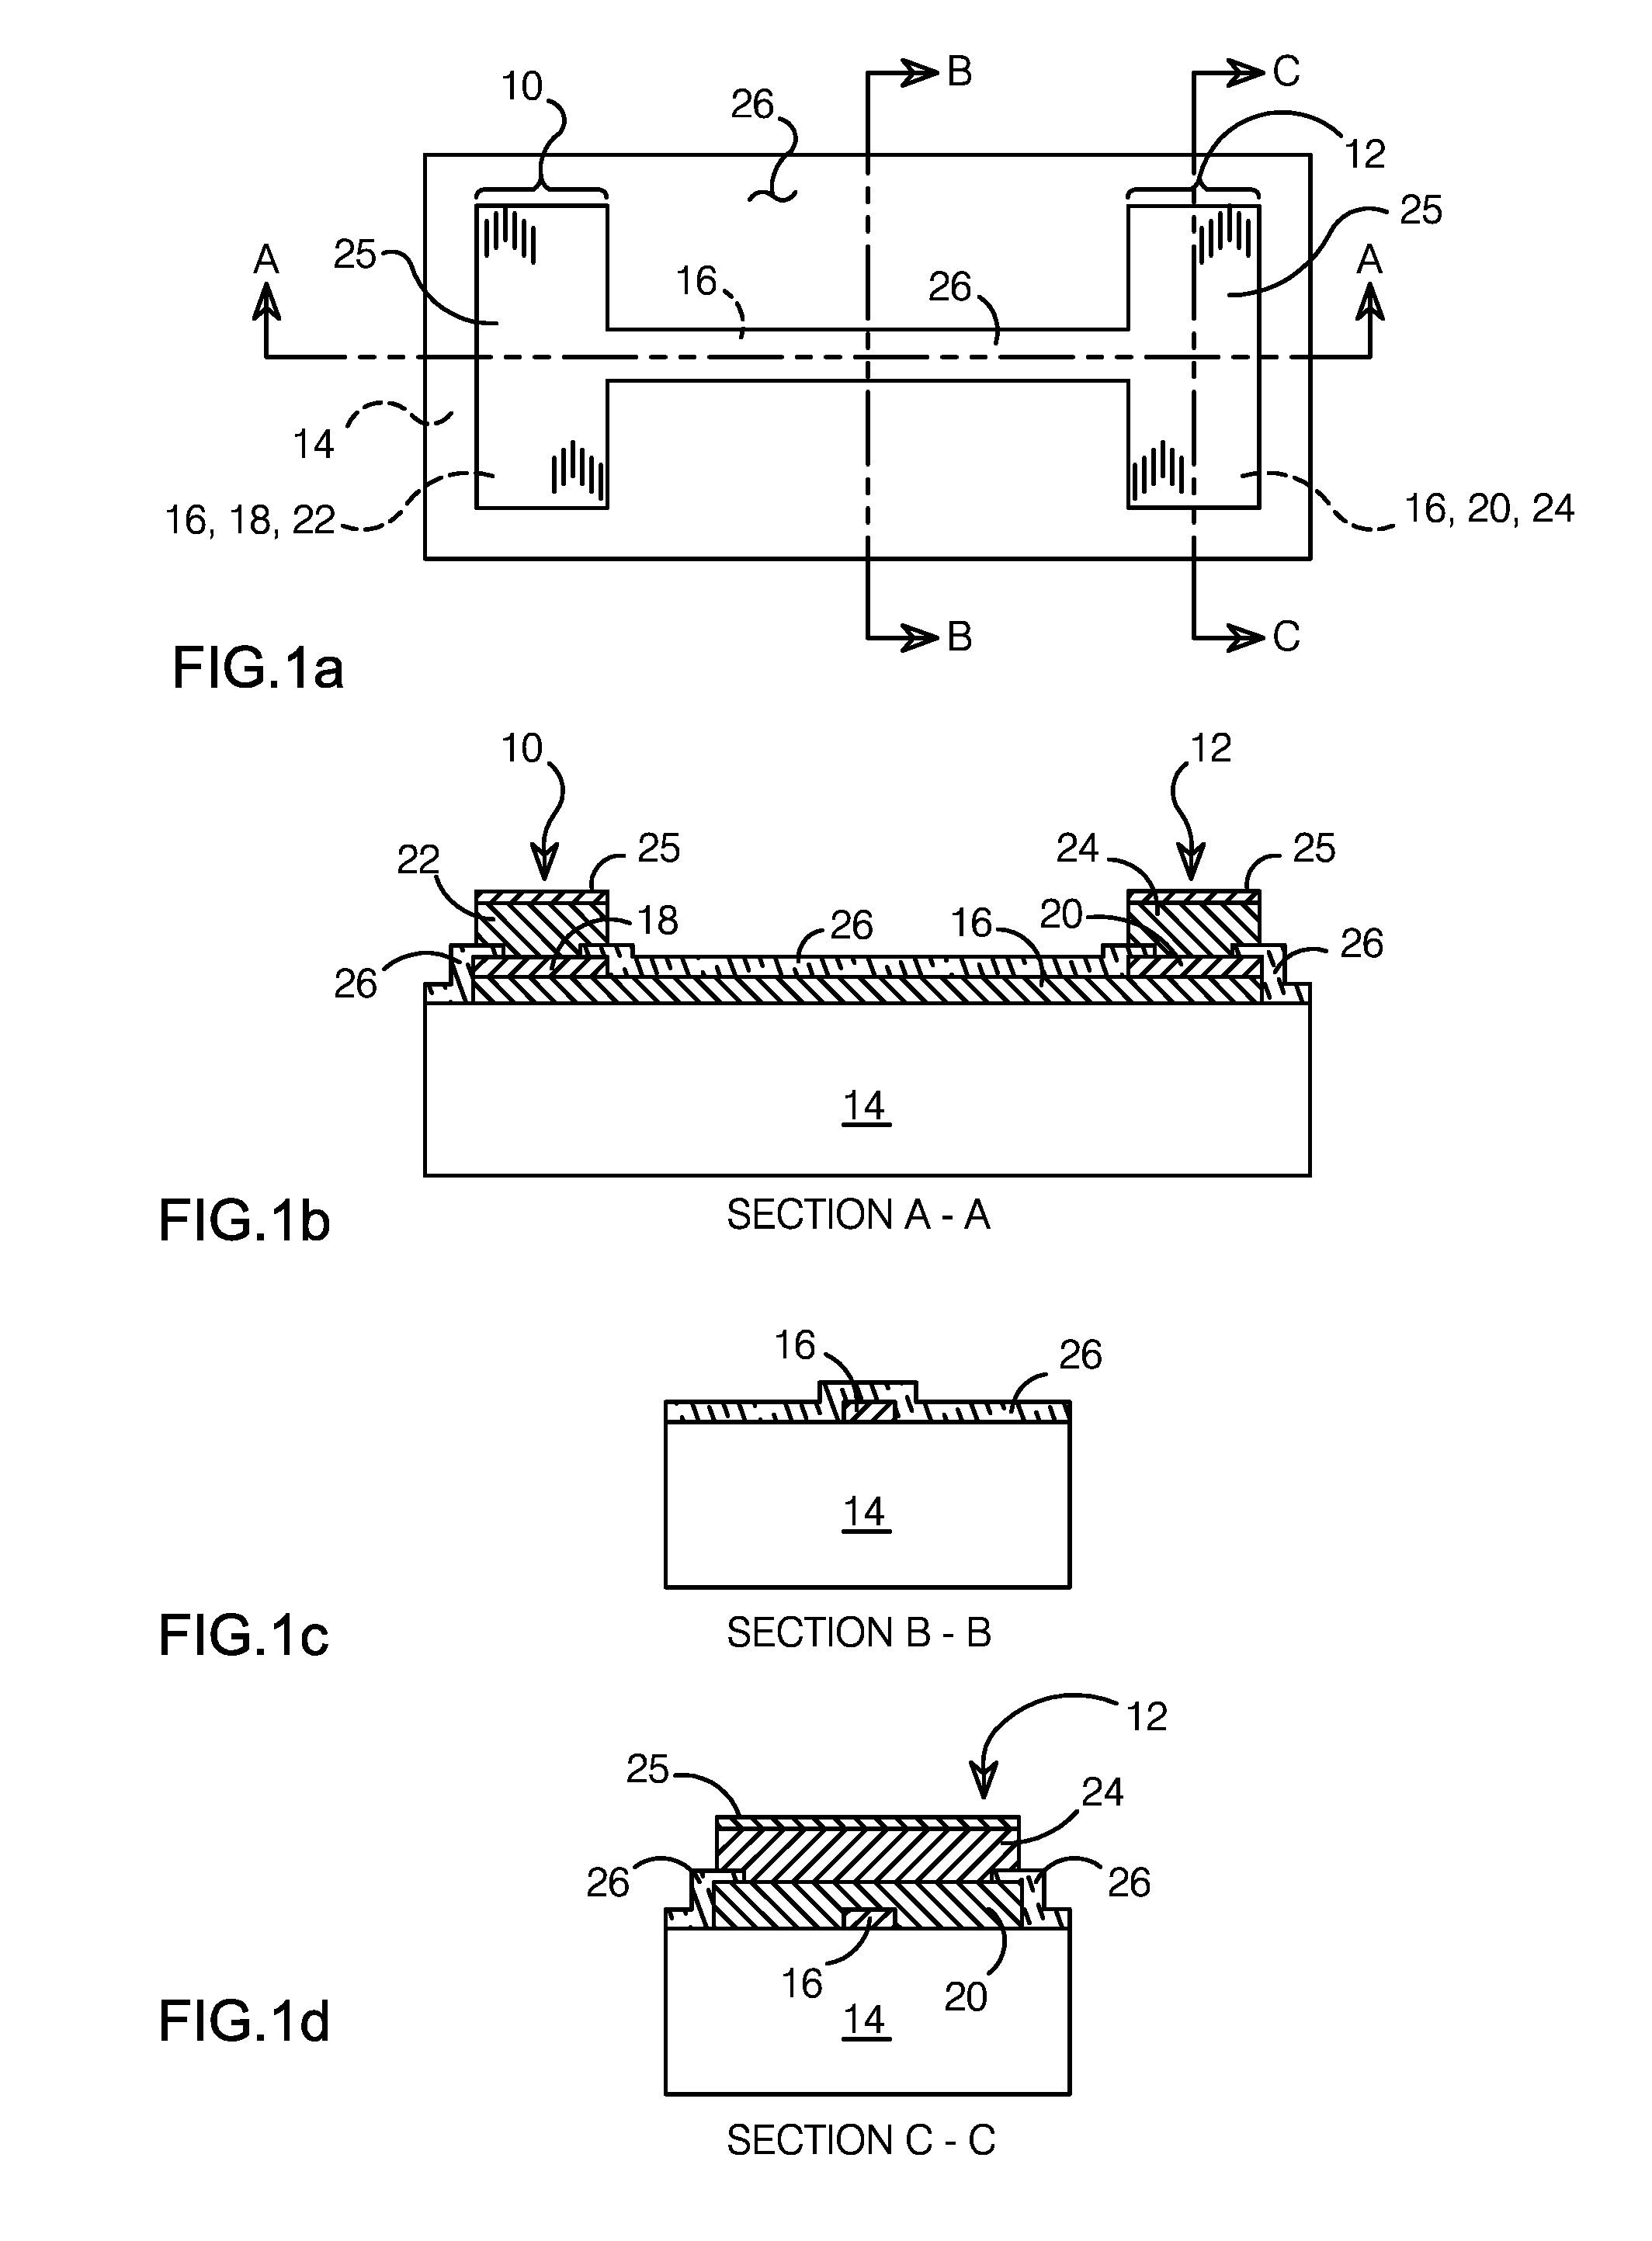 Thin-film aluminum nitride encapsulant for metallic structures on integrated circuits and method of forming same